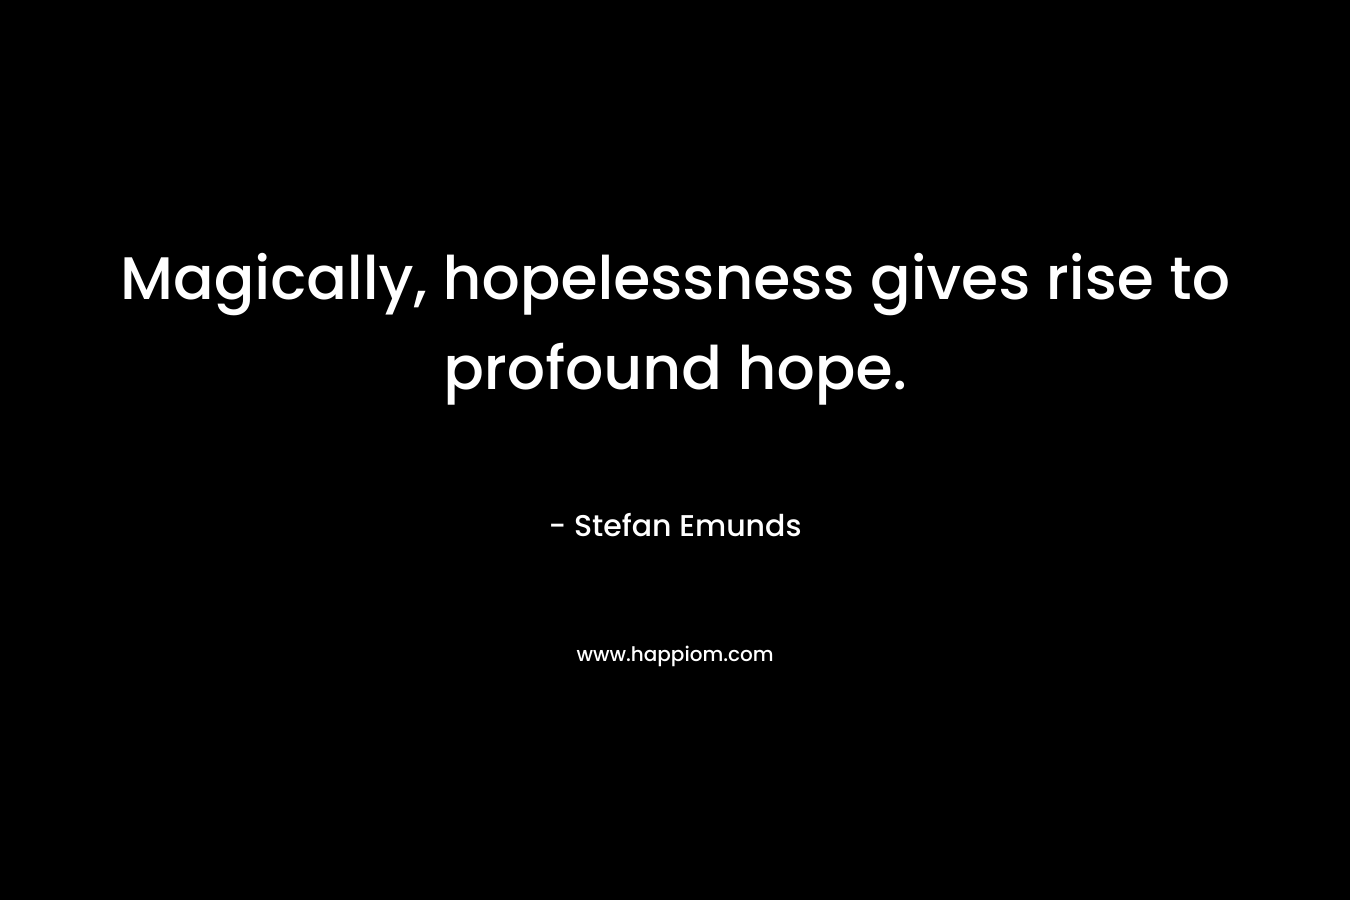 Magically, hopelessness gives rise to profound hope.